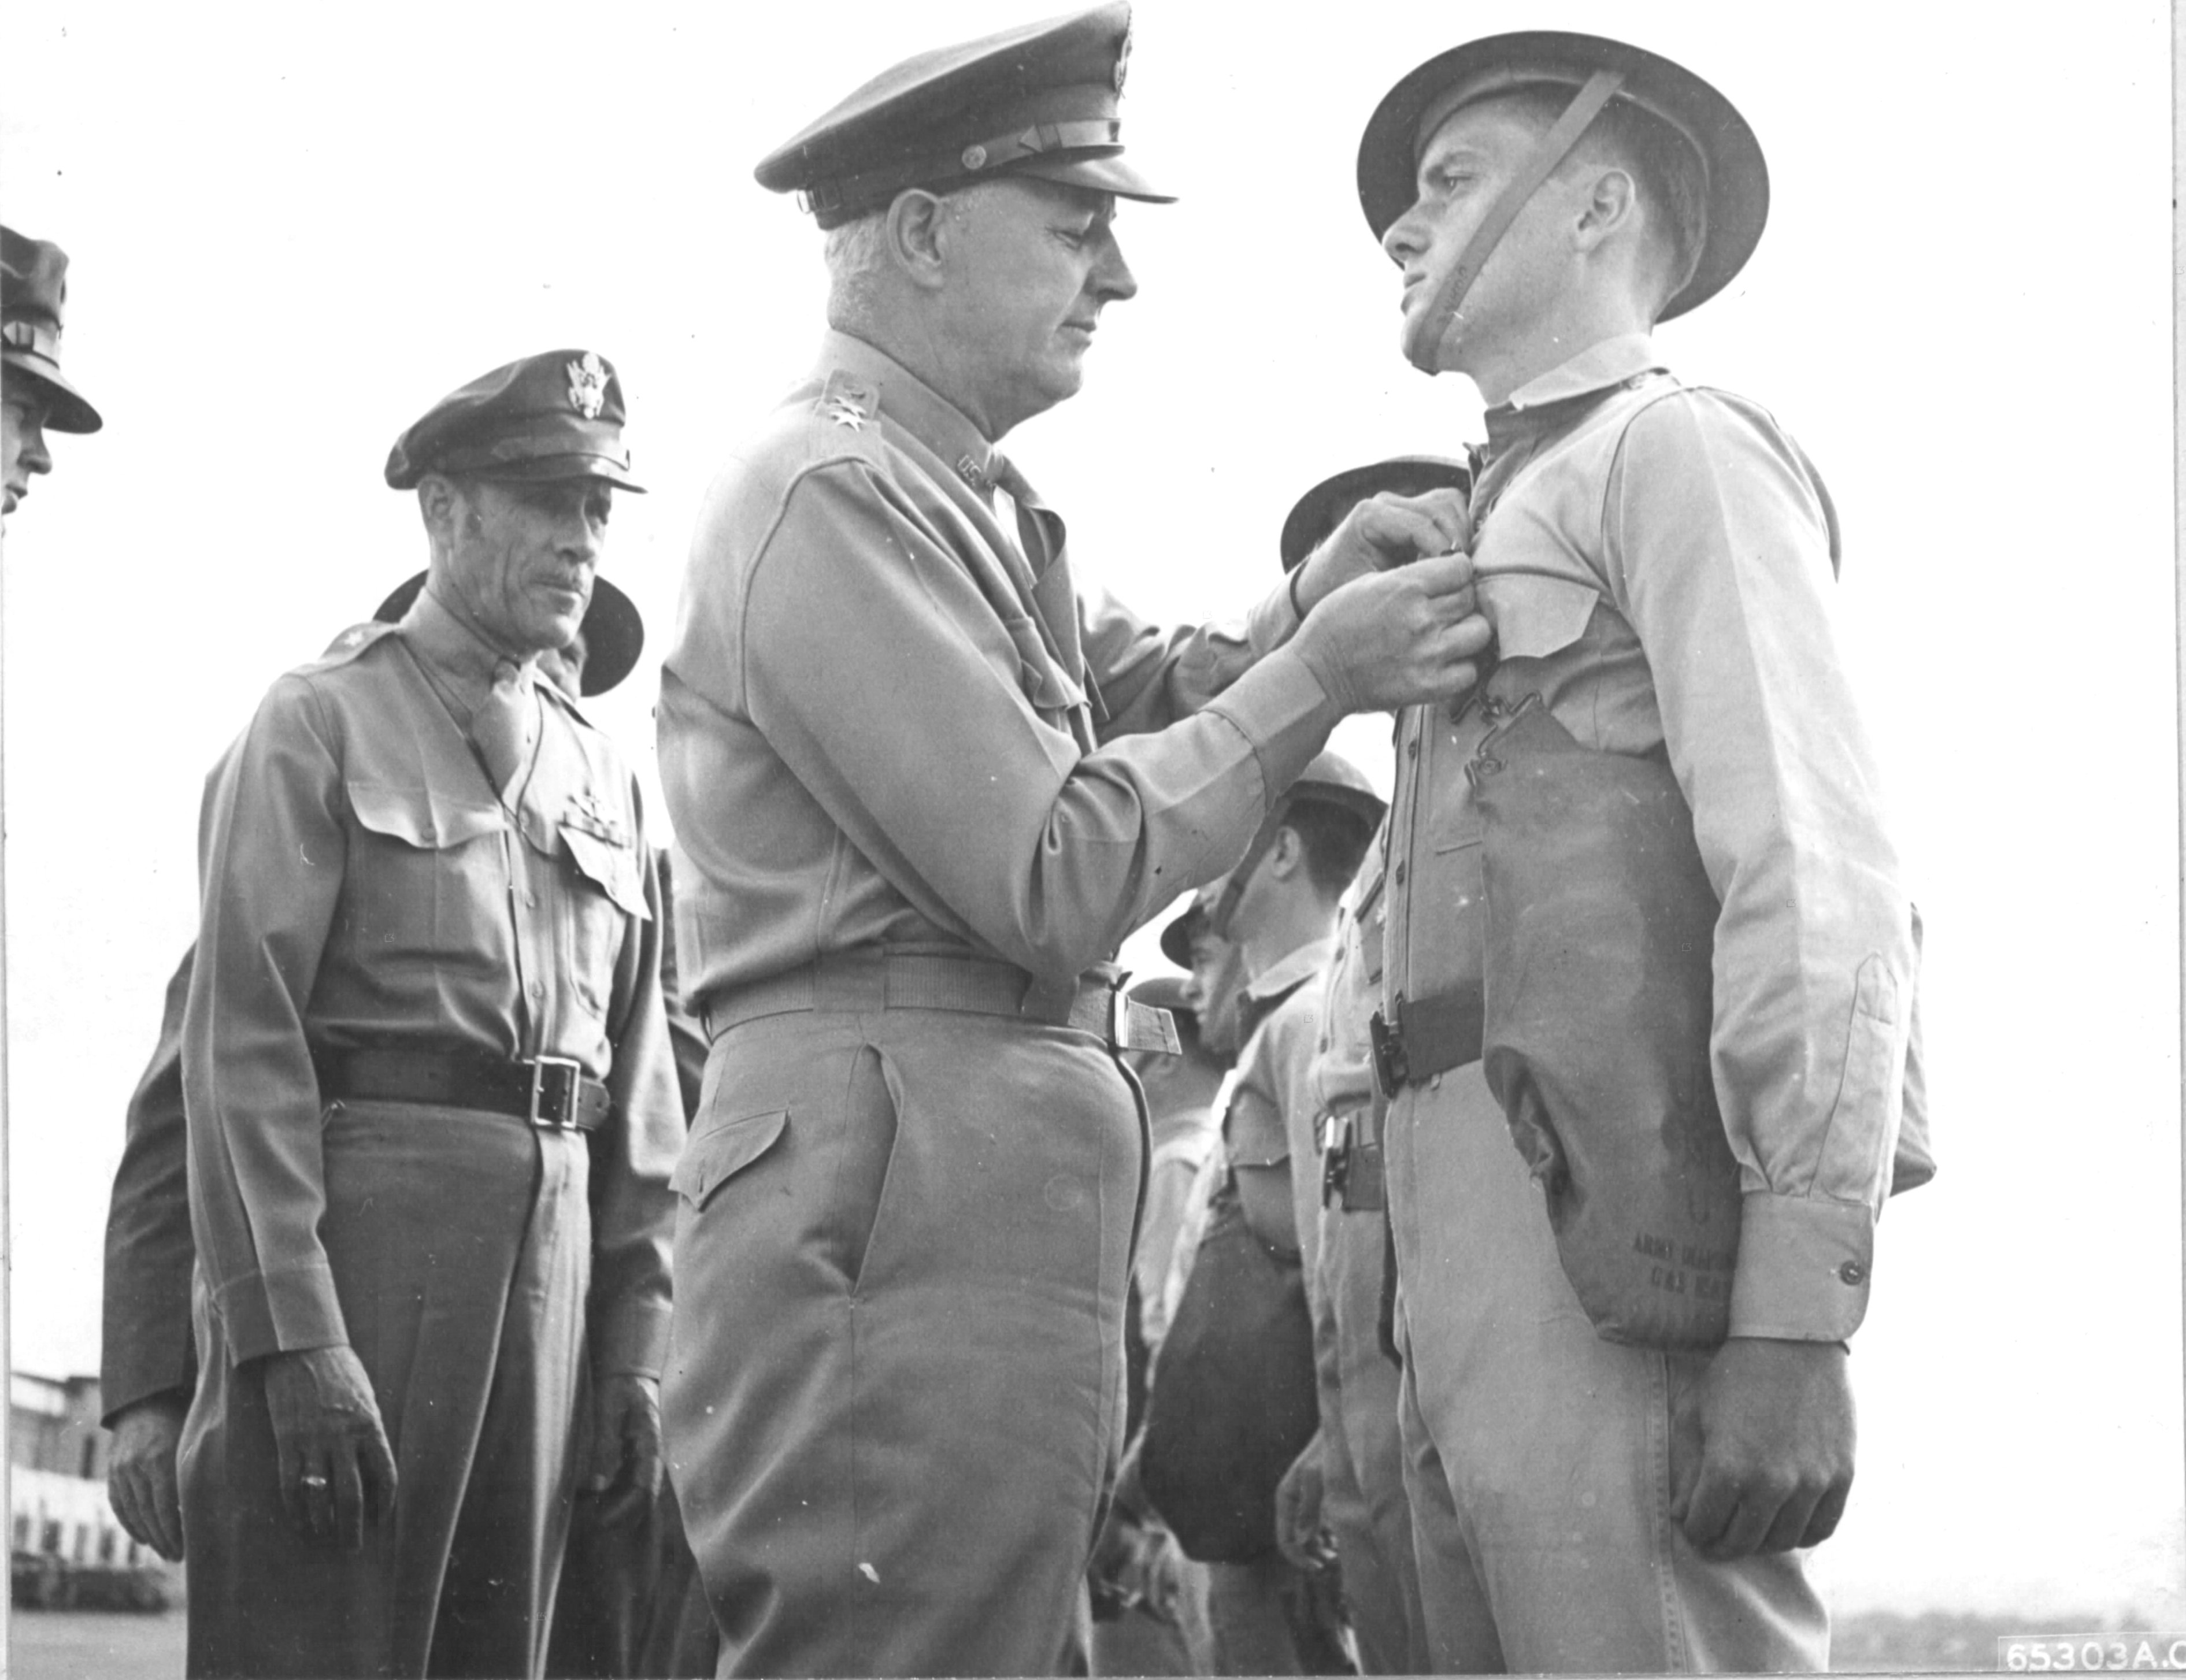 Lieutenant General Delos Emmons decorating an enlisted man for actions performed during the Japanese attack on Pearl Harbor. Hickam Field, 23 Dec 1941. Major General Clarence Tinker looking on.